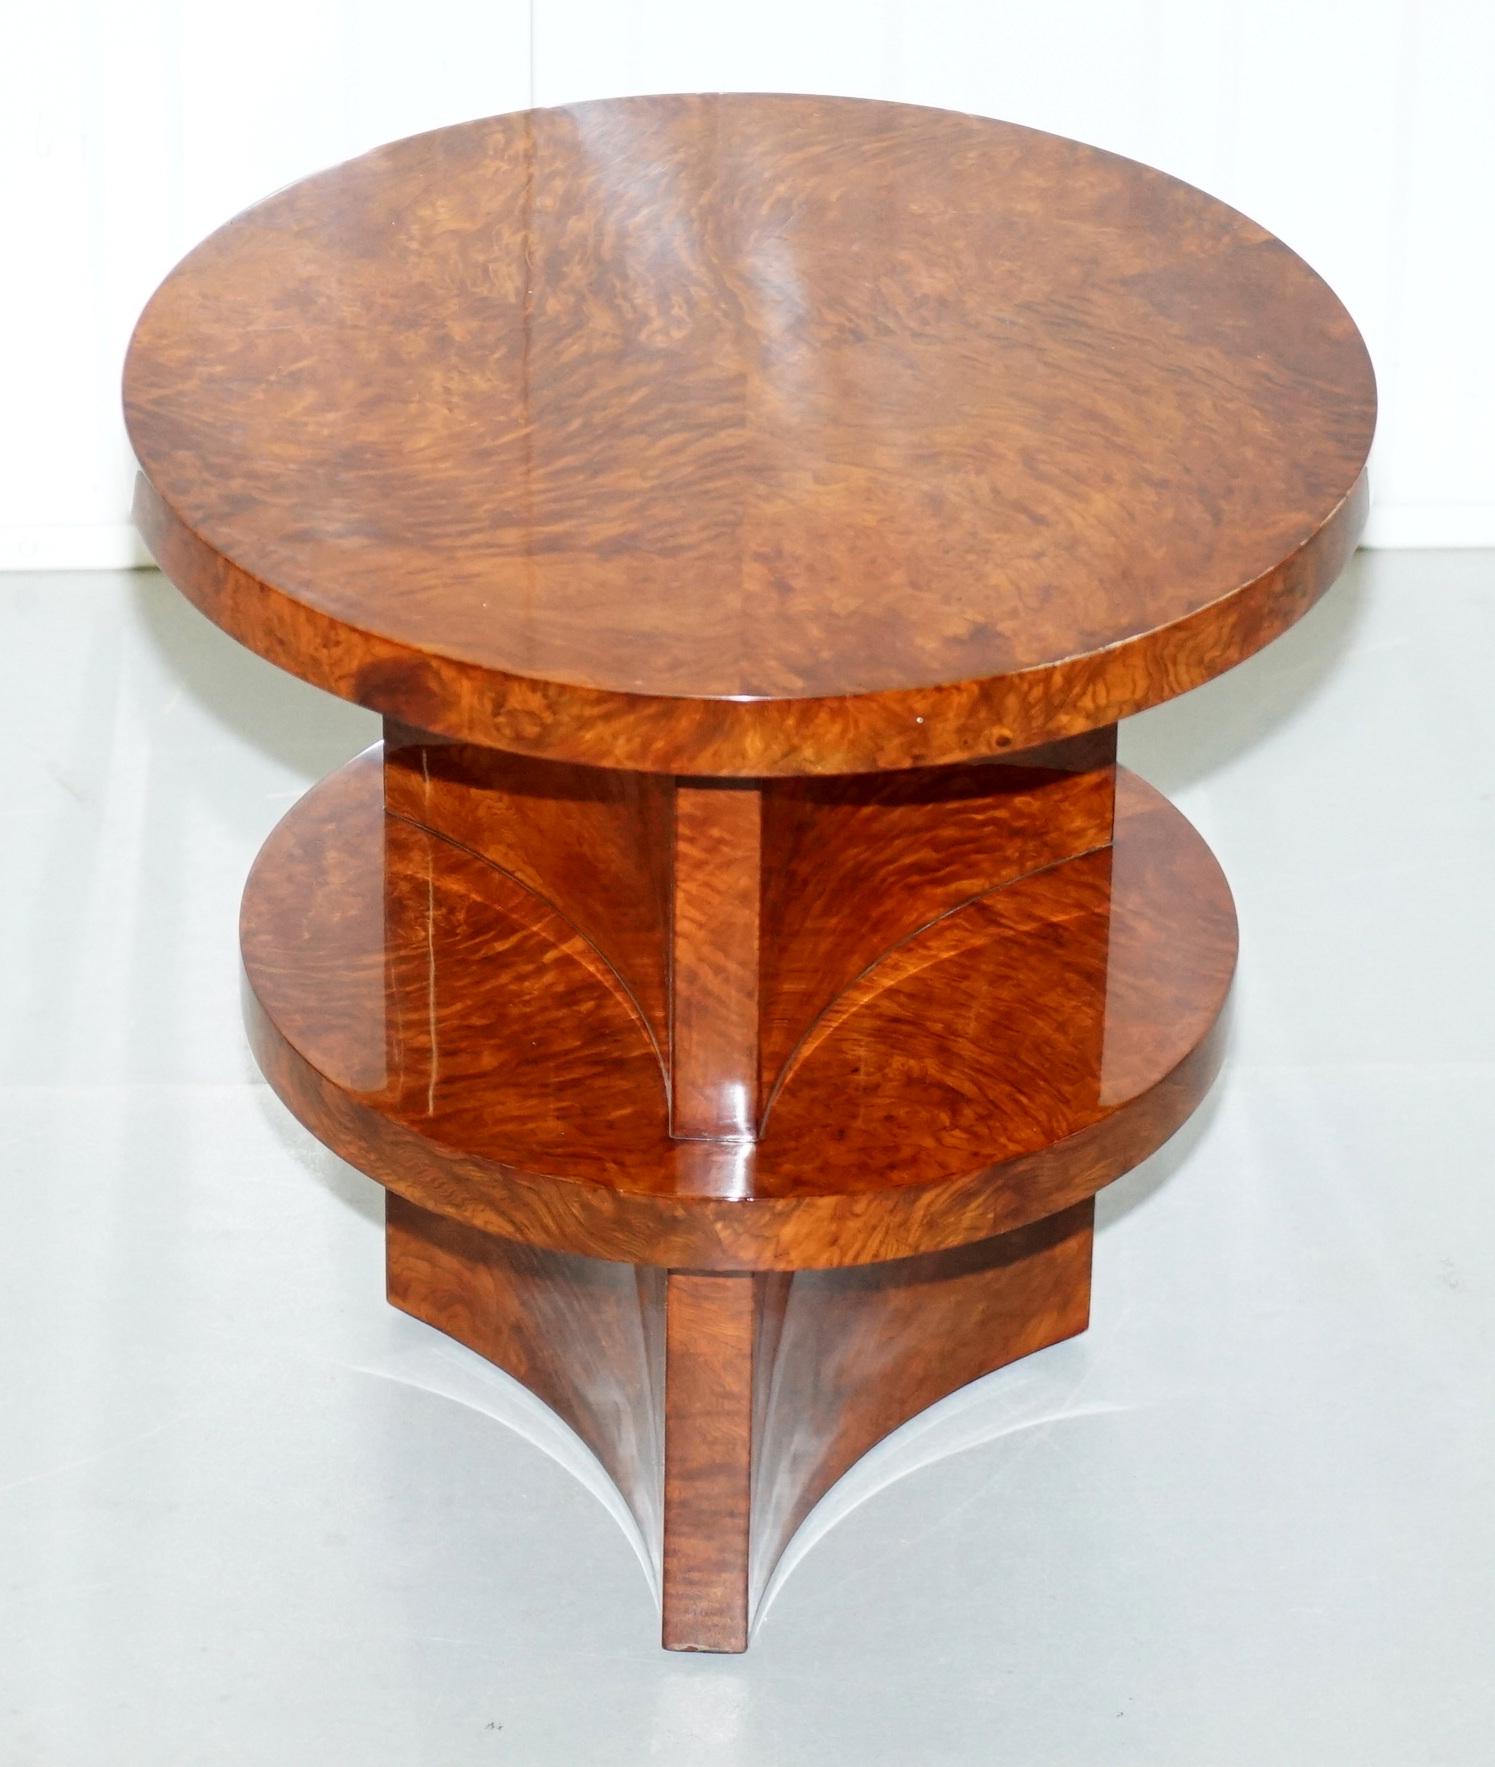 We are delighted to offer for sale this stunning as new RRP £3500 Ralph Lauren Brewster Accent side end lamp wine table in Burl Walnut

I have a number of very high-end luxury Ralph Lauren pieces of furniture that I will be listing over the next